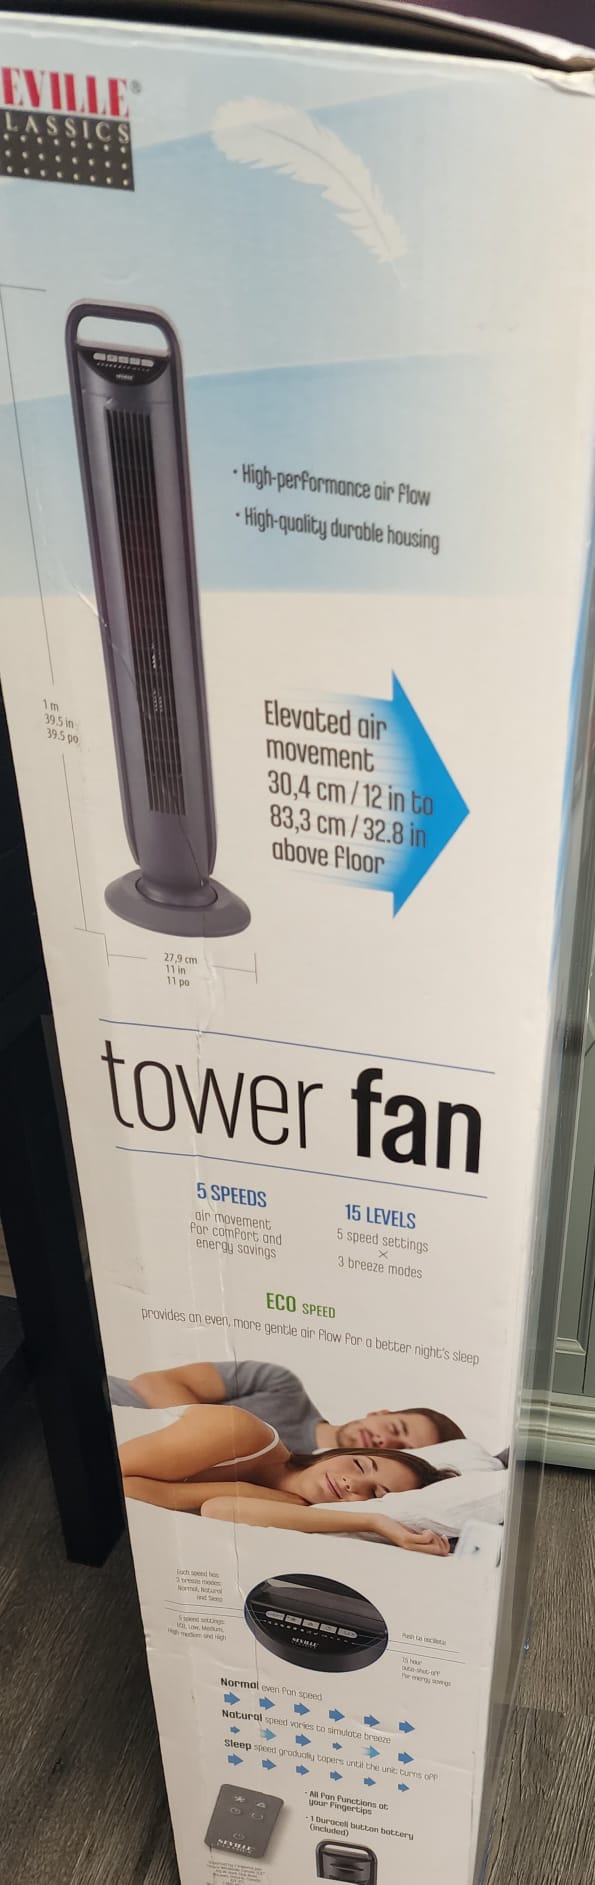 SEVILLE TOWER FAN WITH REMOTE